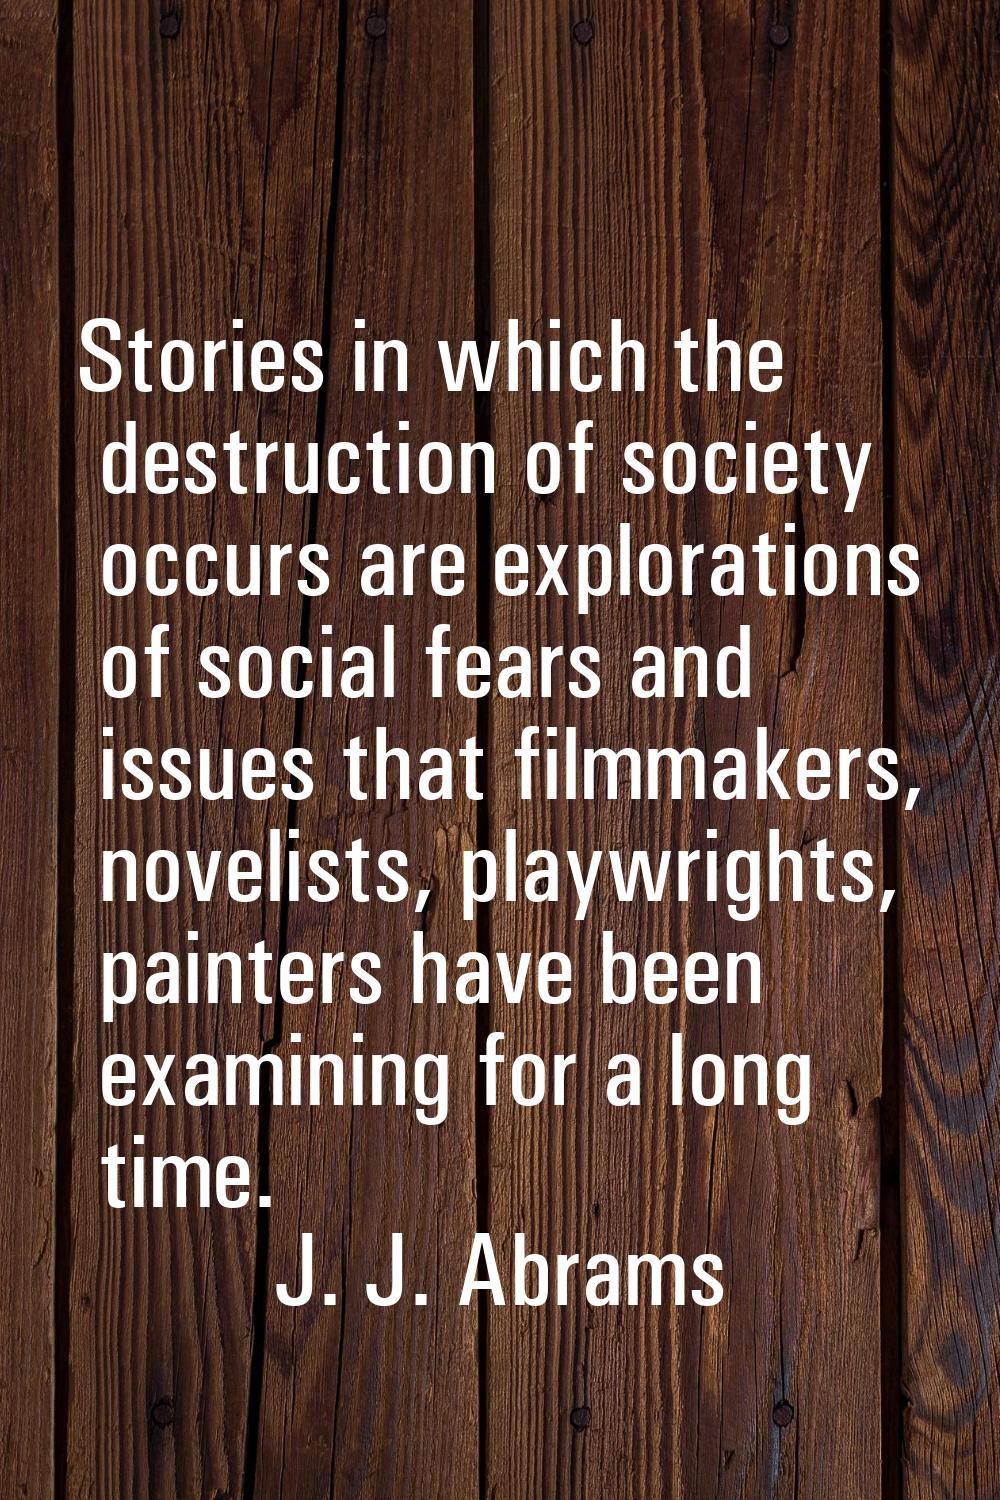 Stories in which the destruction of society occurs are explorations of social fears and issues that